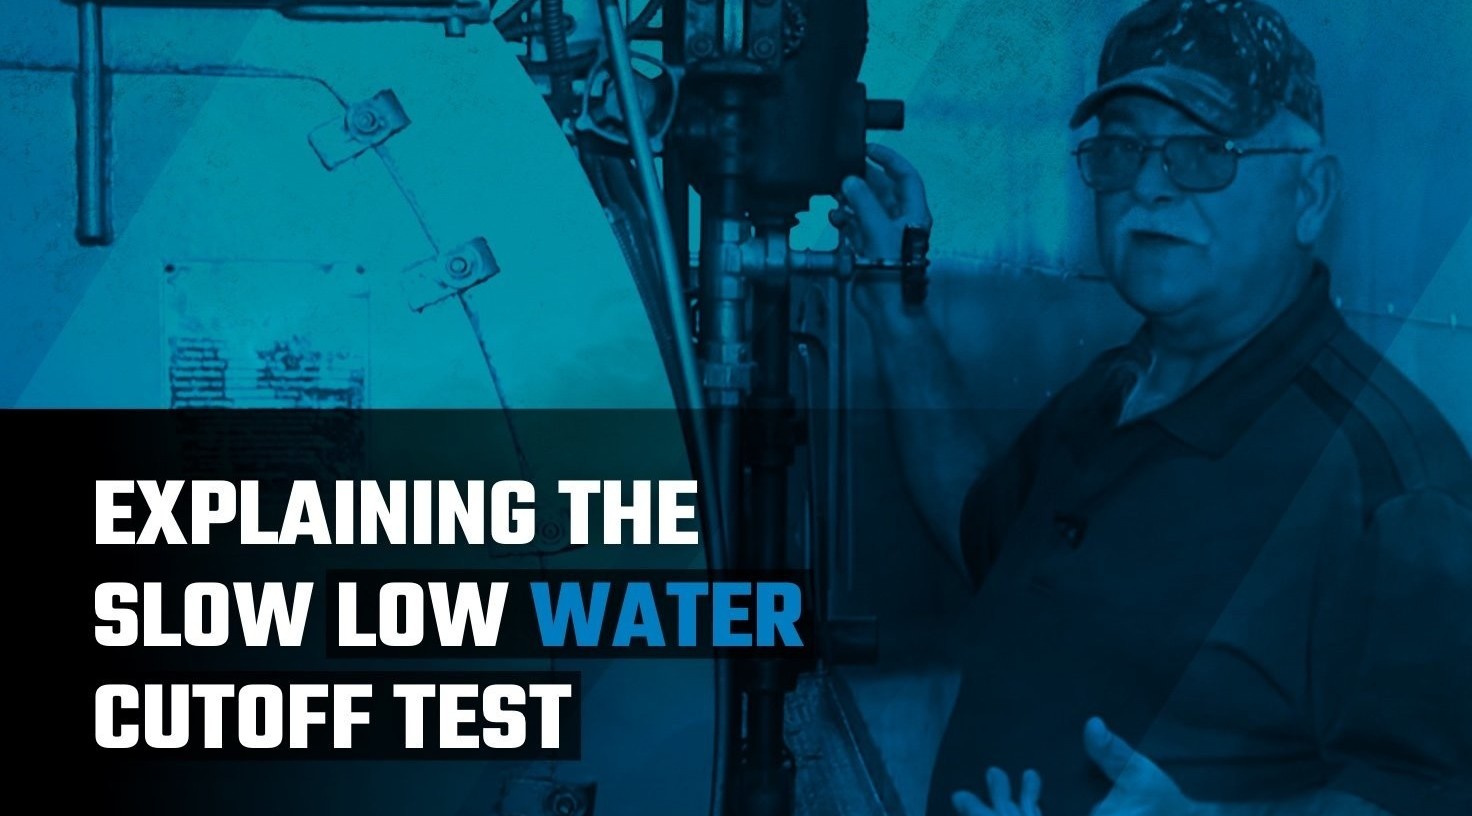 Explaining the Slow Low Water Cutoff Test